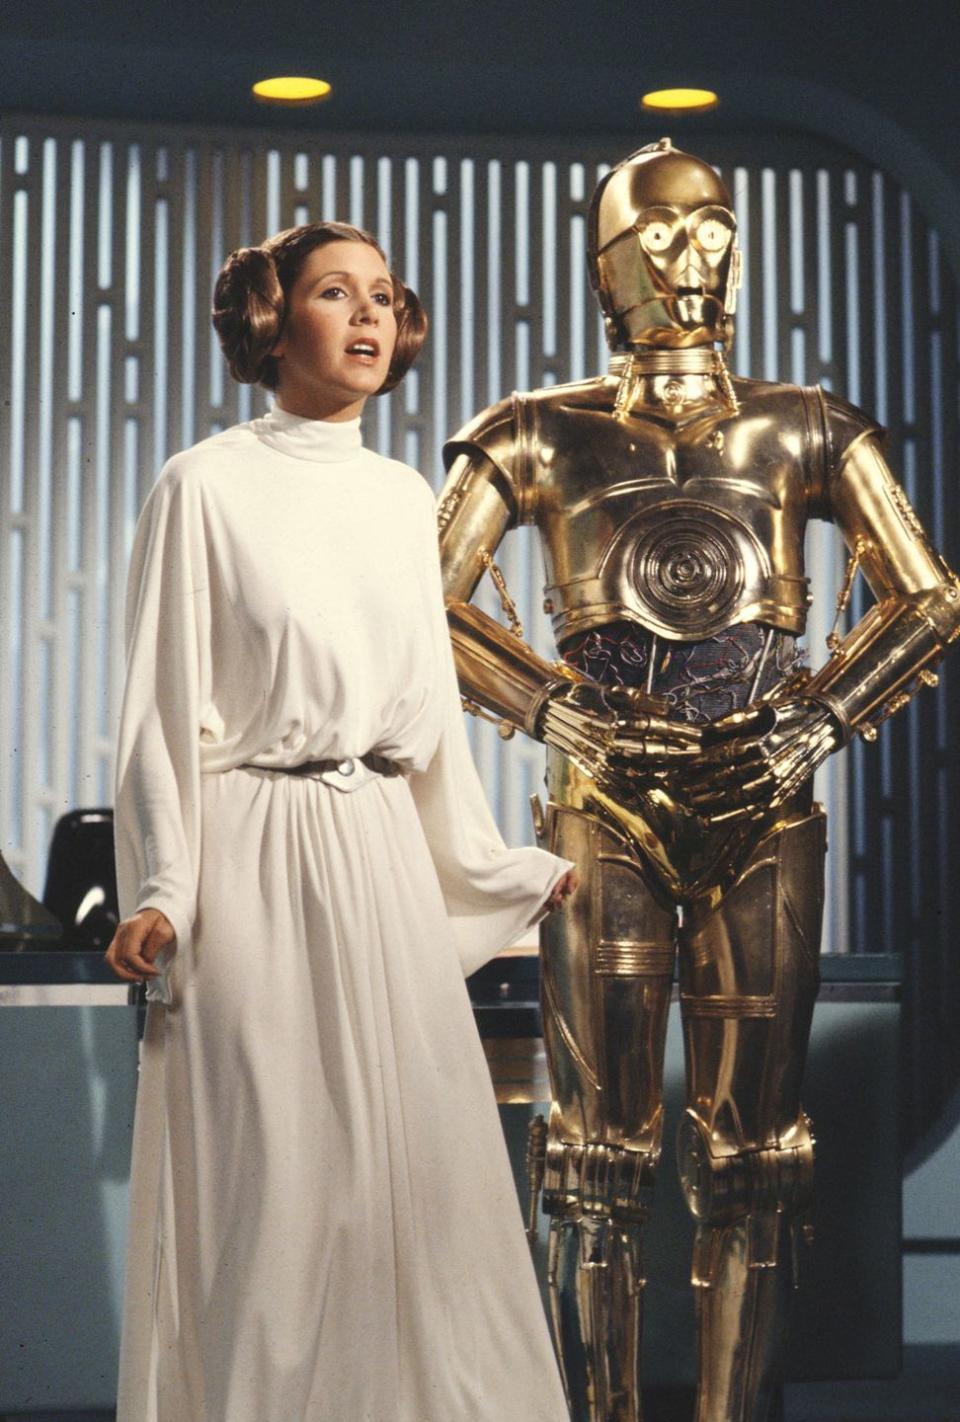 108 Iconic Movie Dresses: Carrie Fisher